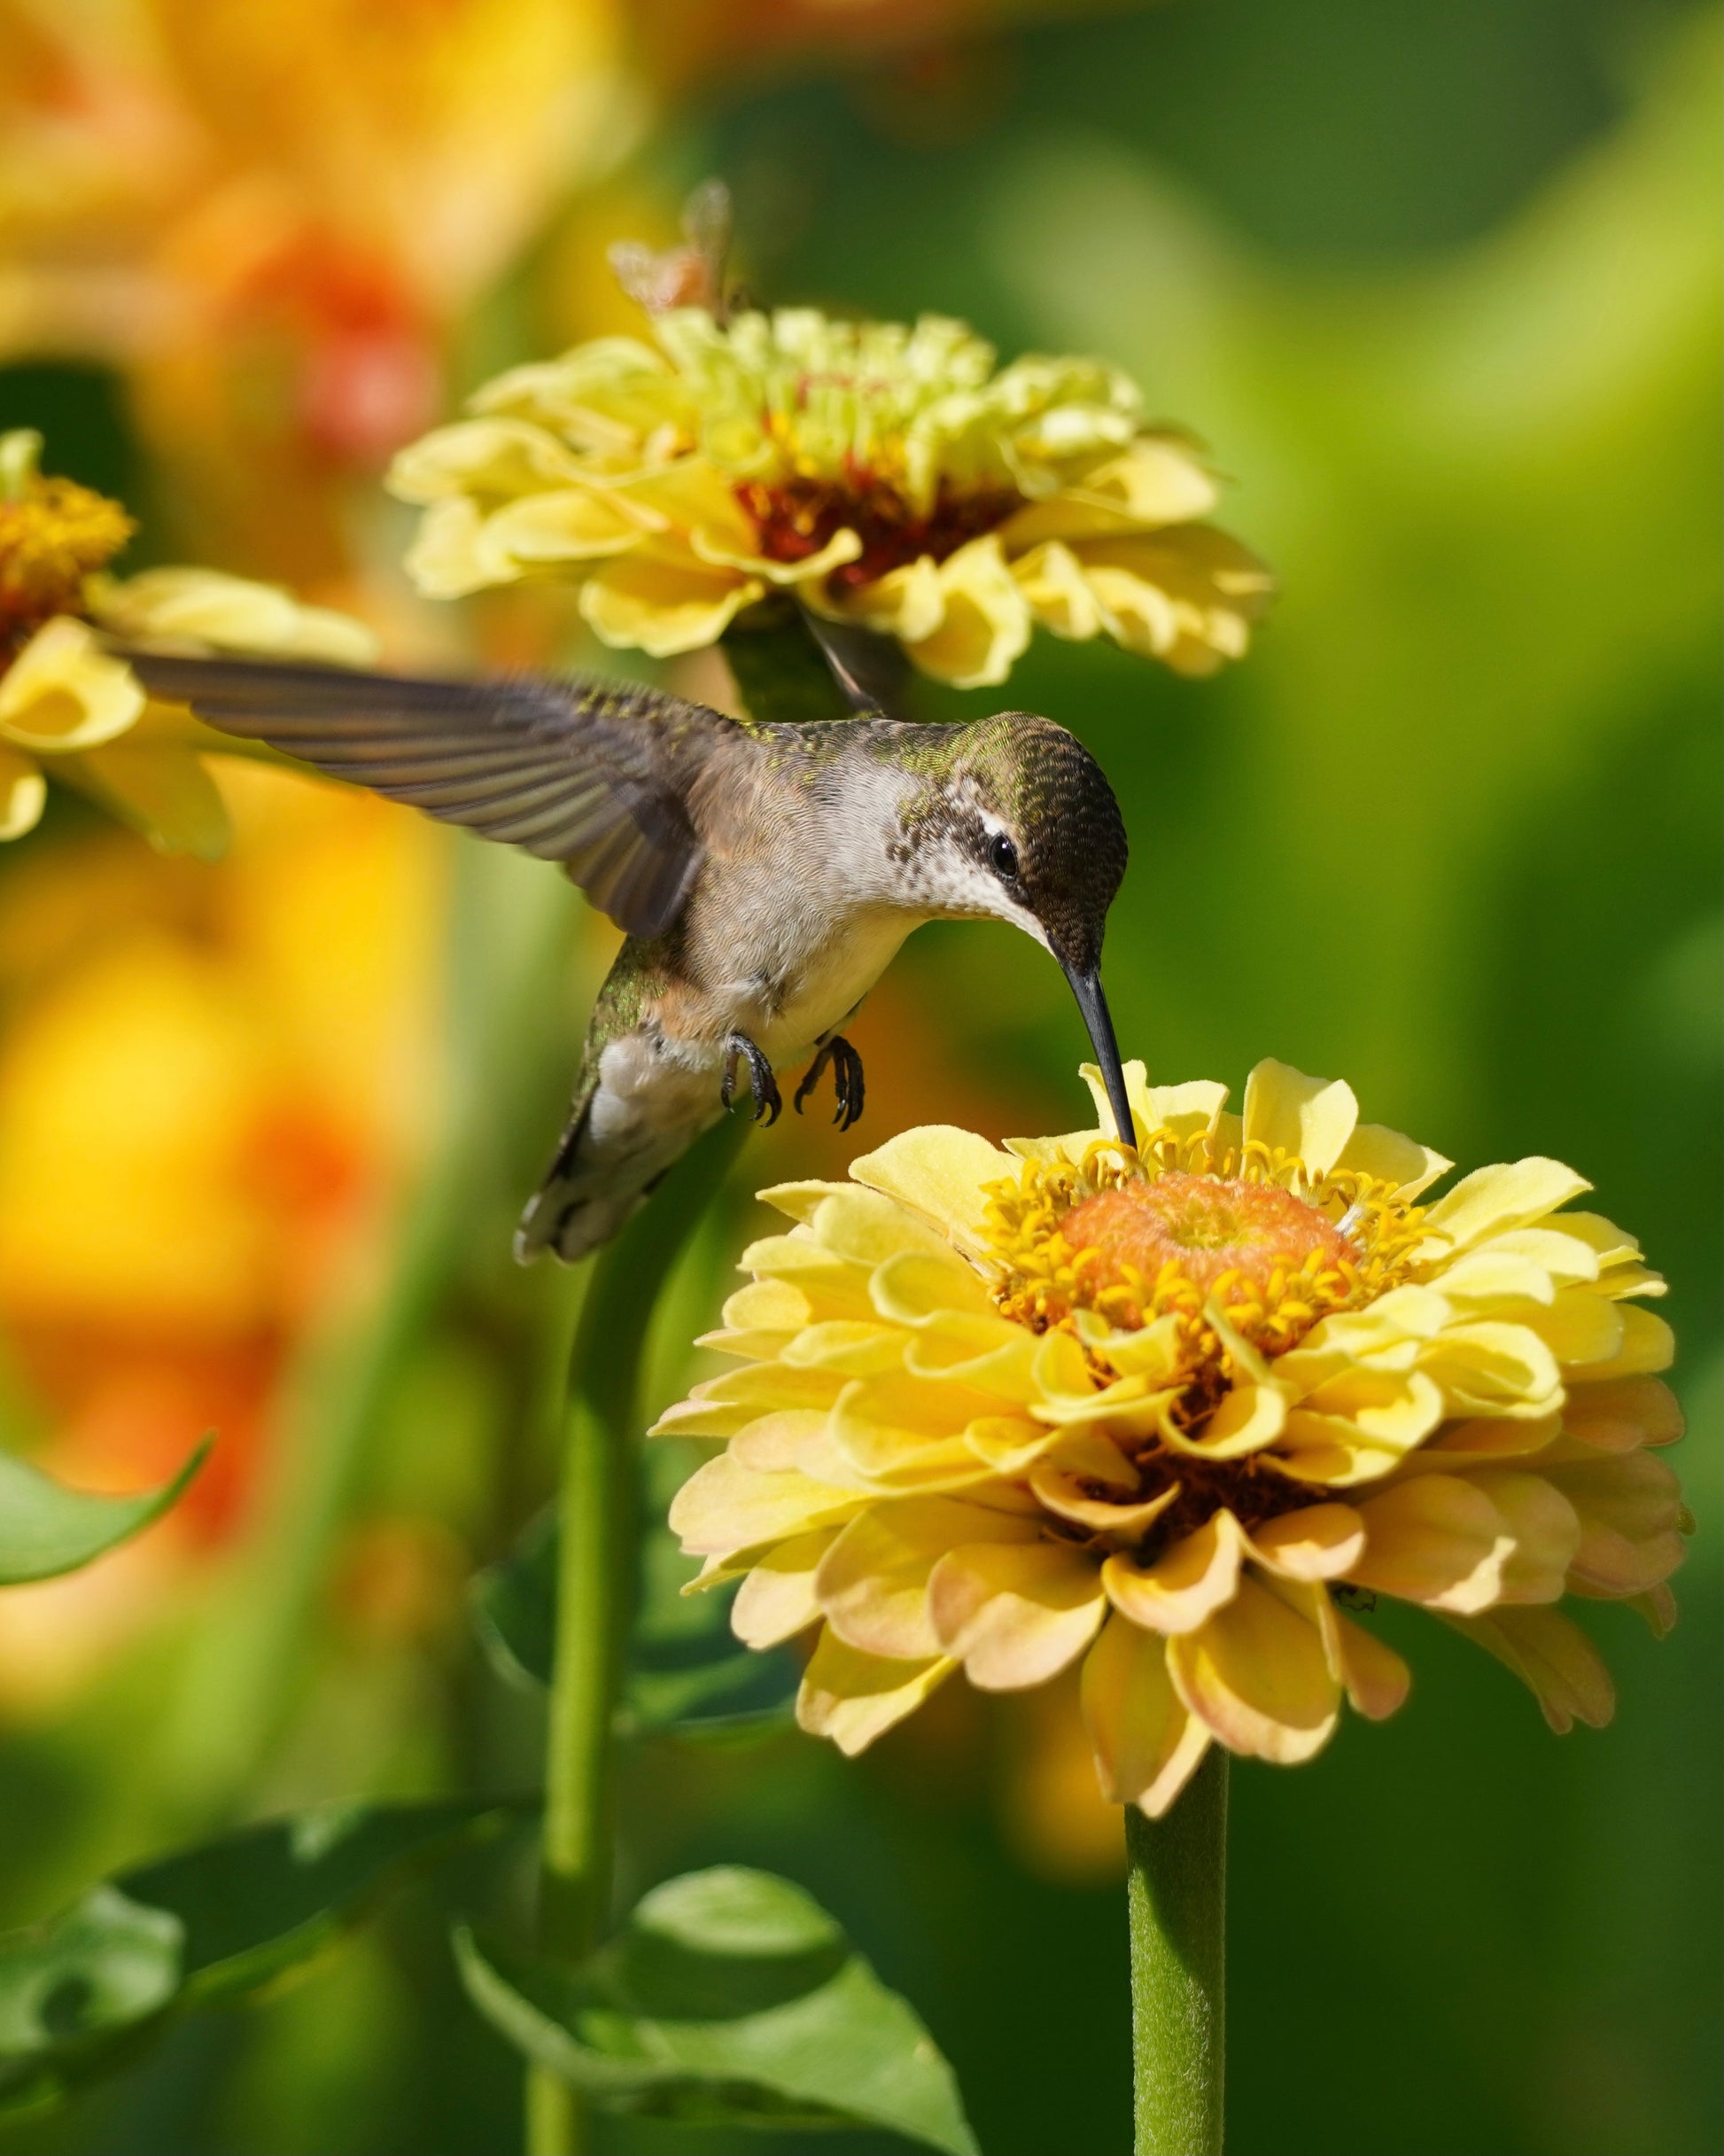 A Ruby-Throated Hummingbird sipping nectar from a yellow zinnia flower. A Honey Bee drinks from a flower in the background.